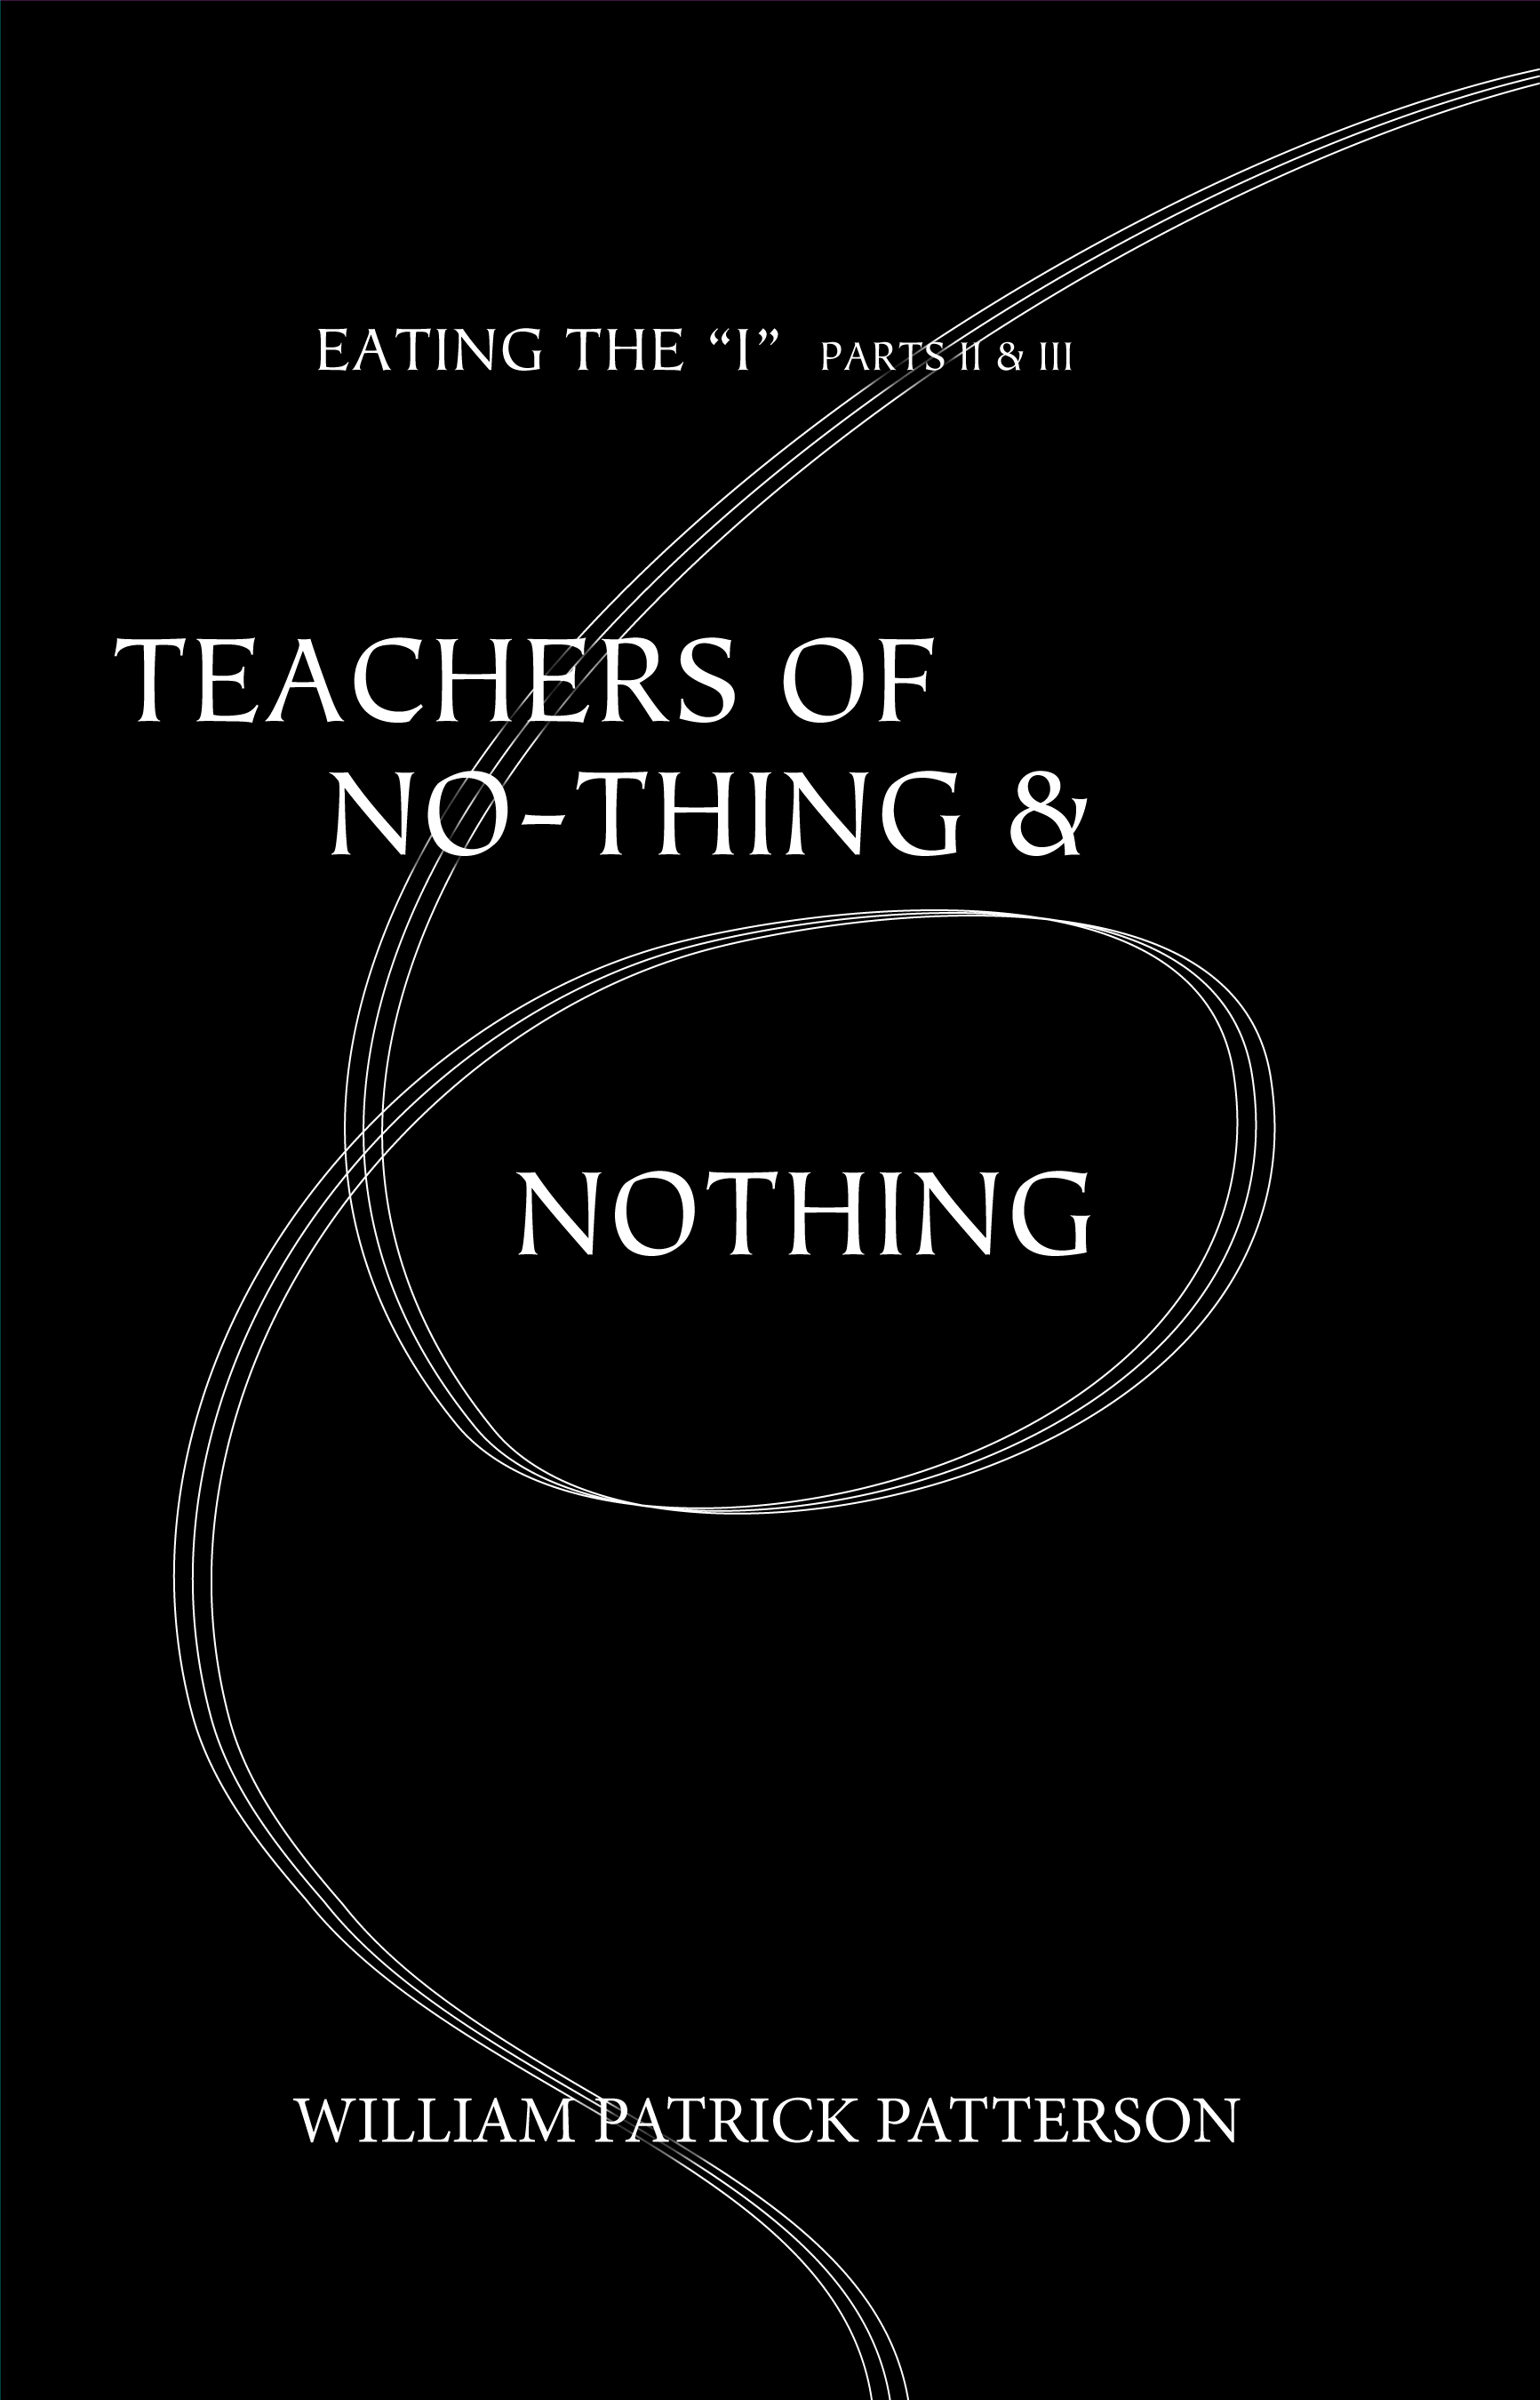 Teachers of No-Thing & Nothing: Eating The I Parts II & III